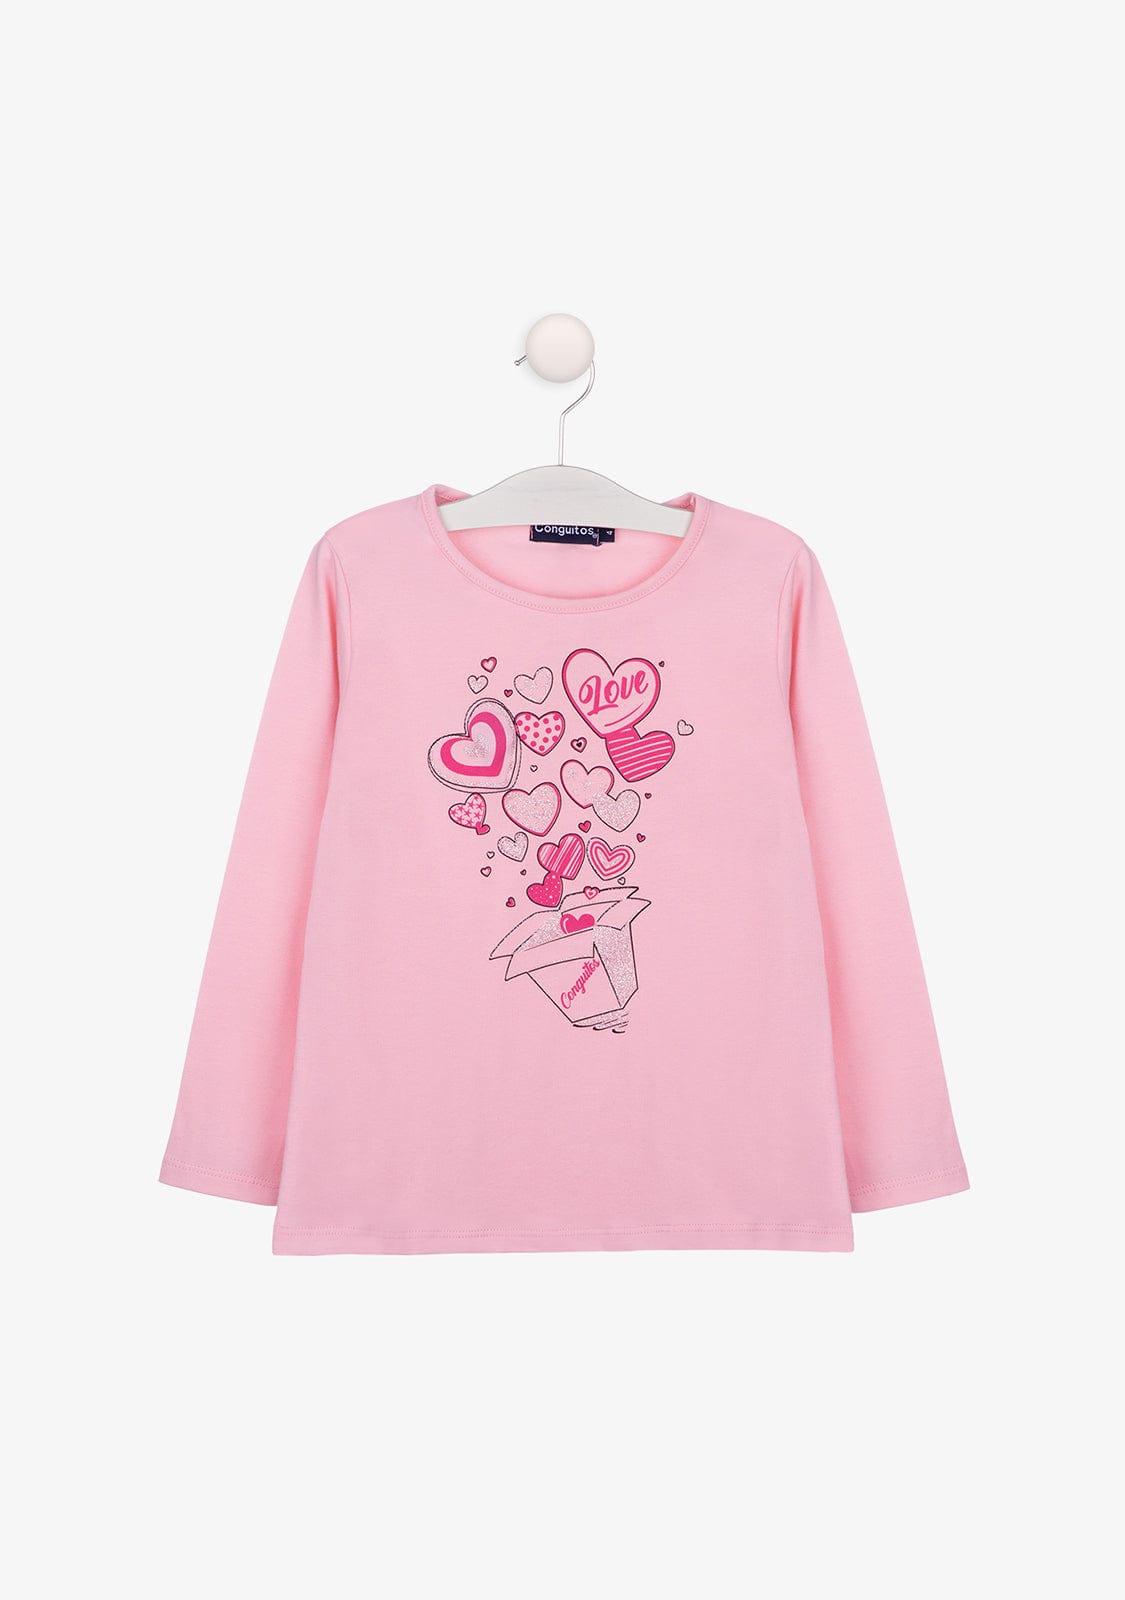 CONGUITOS TEXTIL Clothing Girl's Pink With Lights Box Shirt